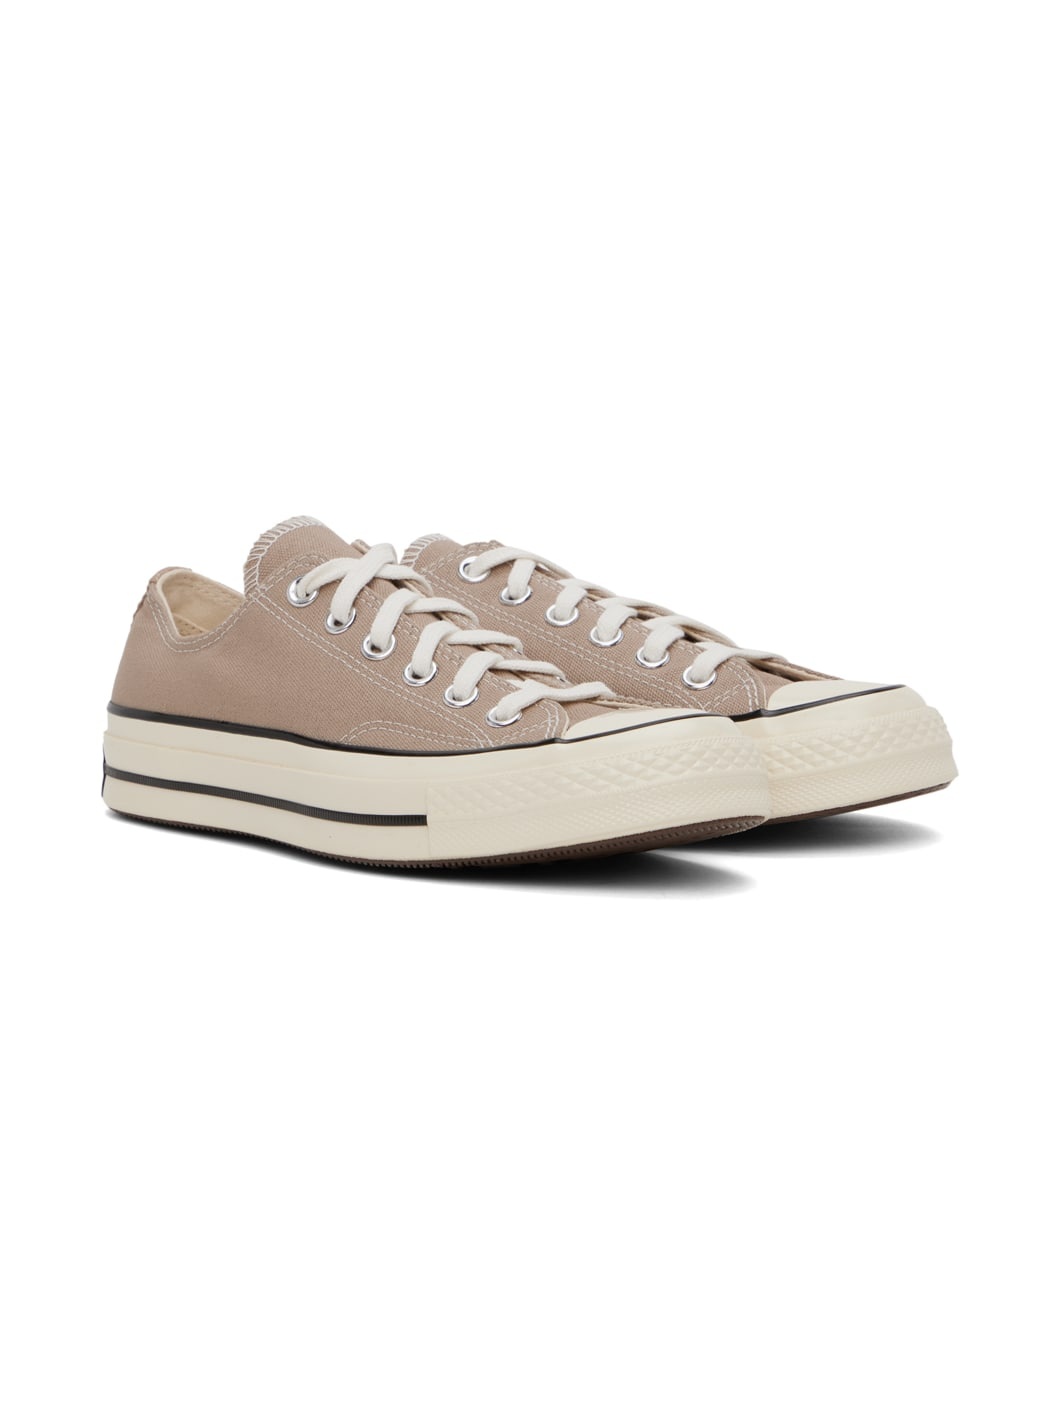 Taupe Chuck 70 Vintage Canvas Sneakers - 4